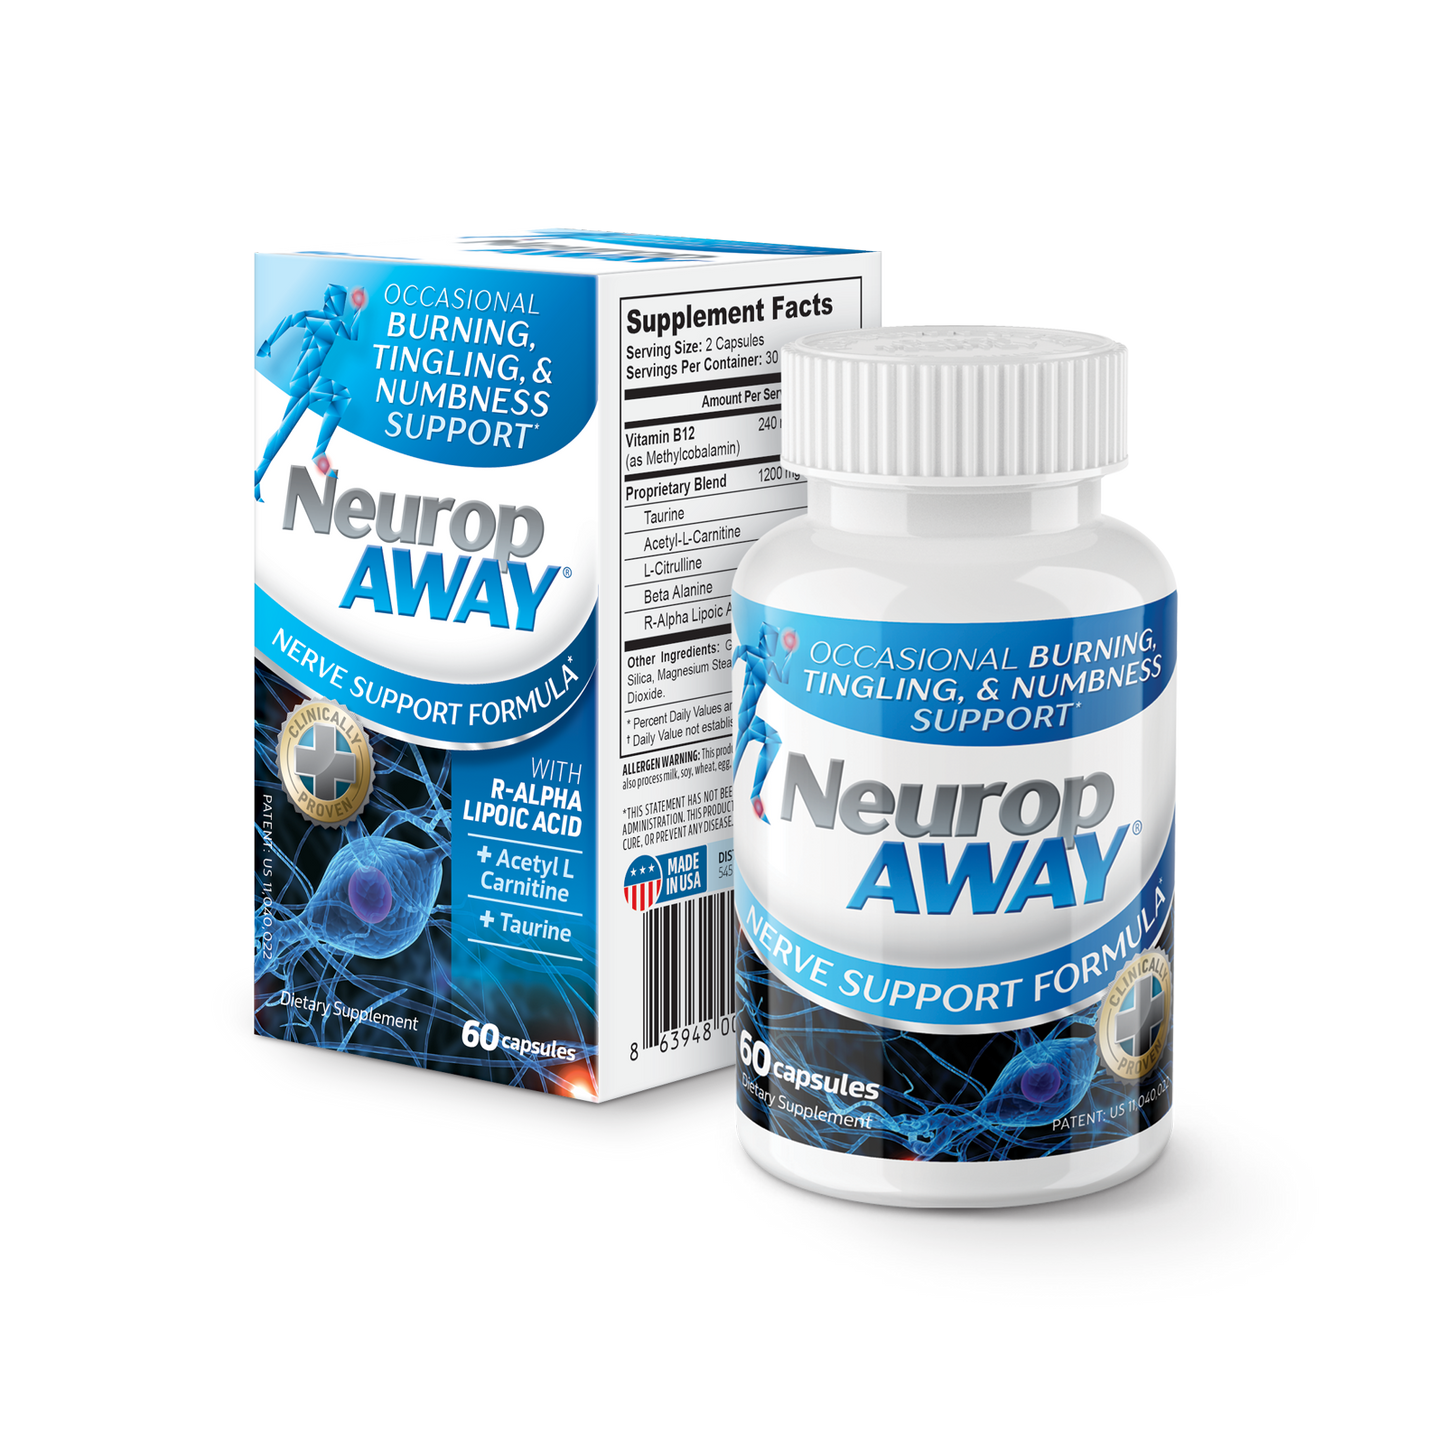 NeuropAWAY Nerve Support 60 Daily Capsules